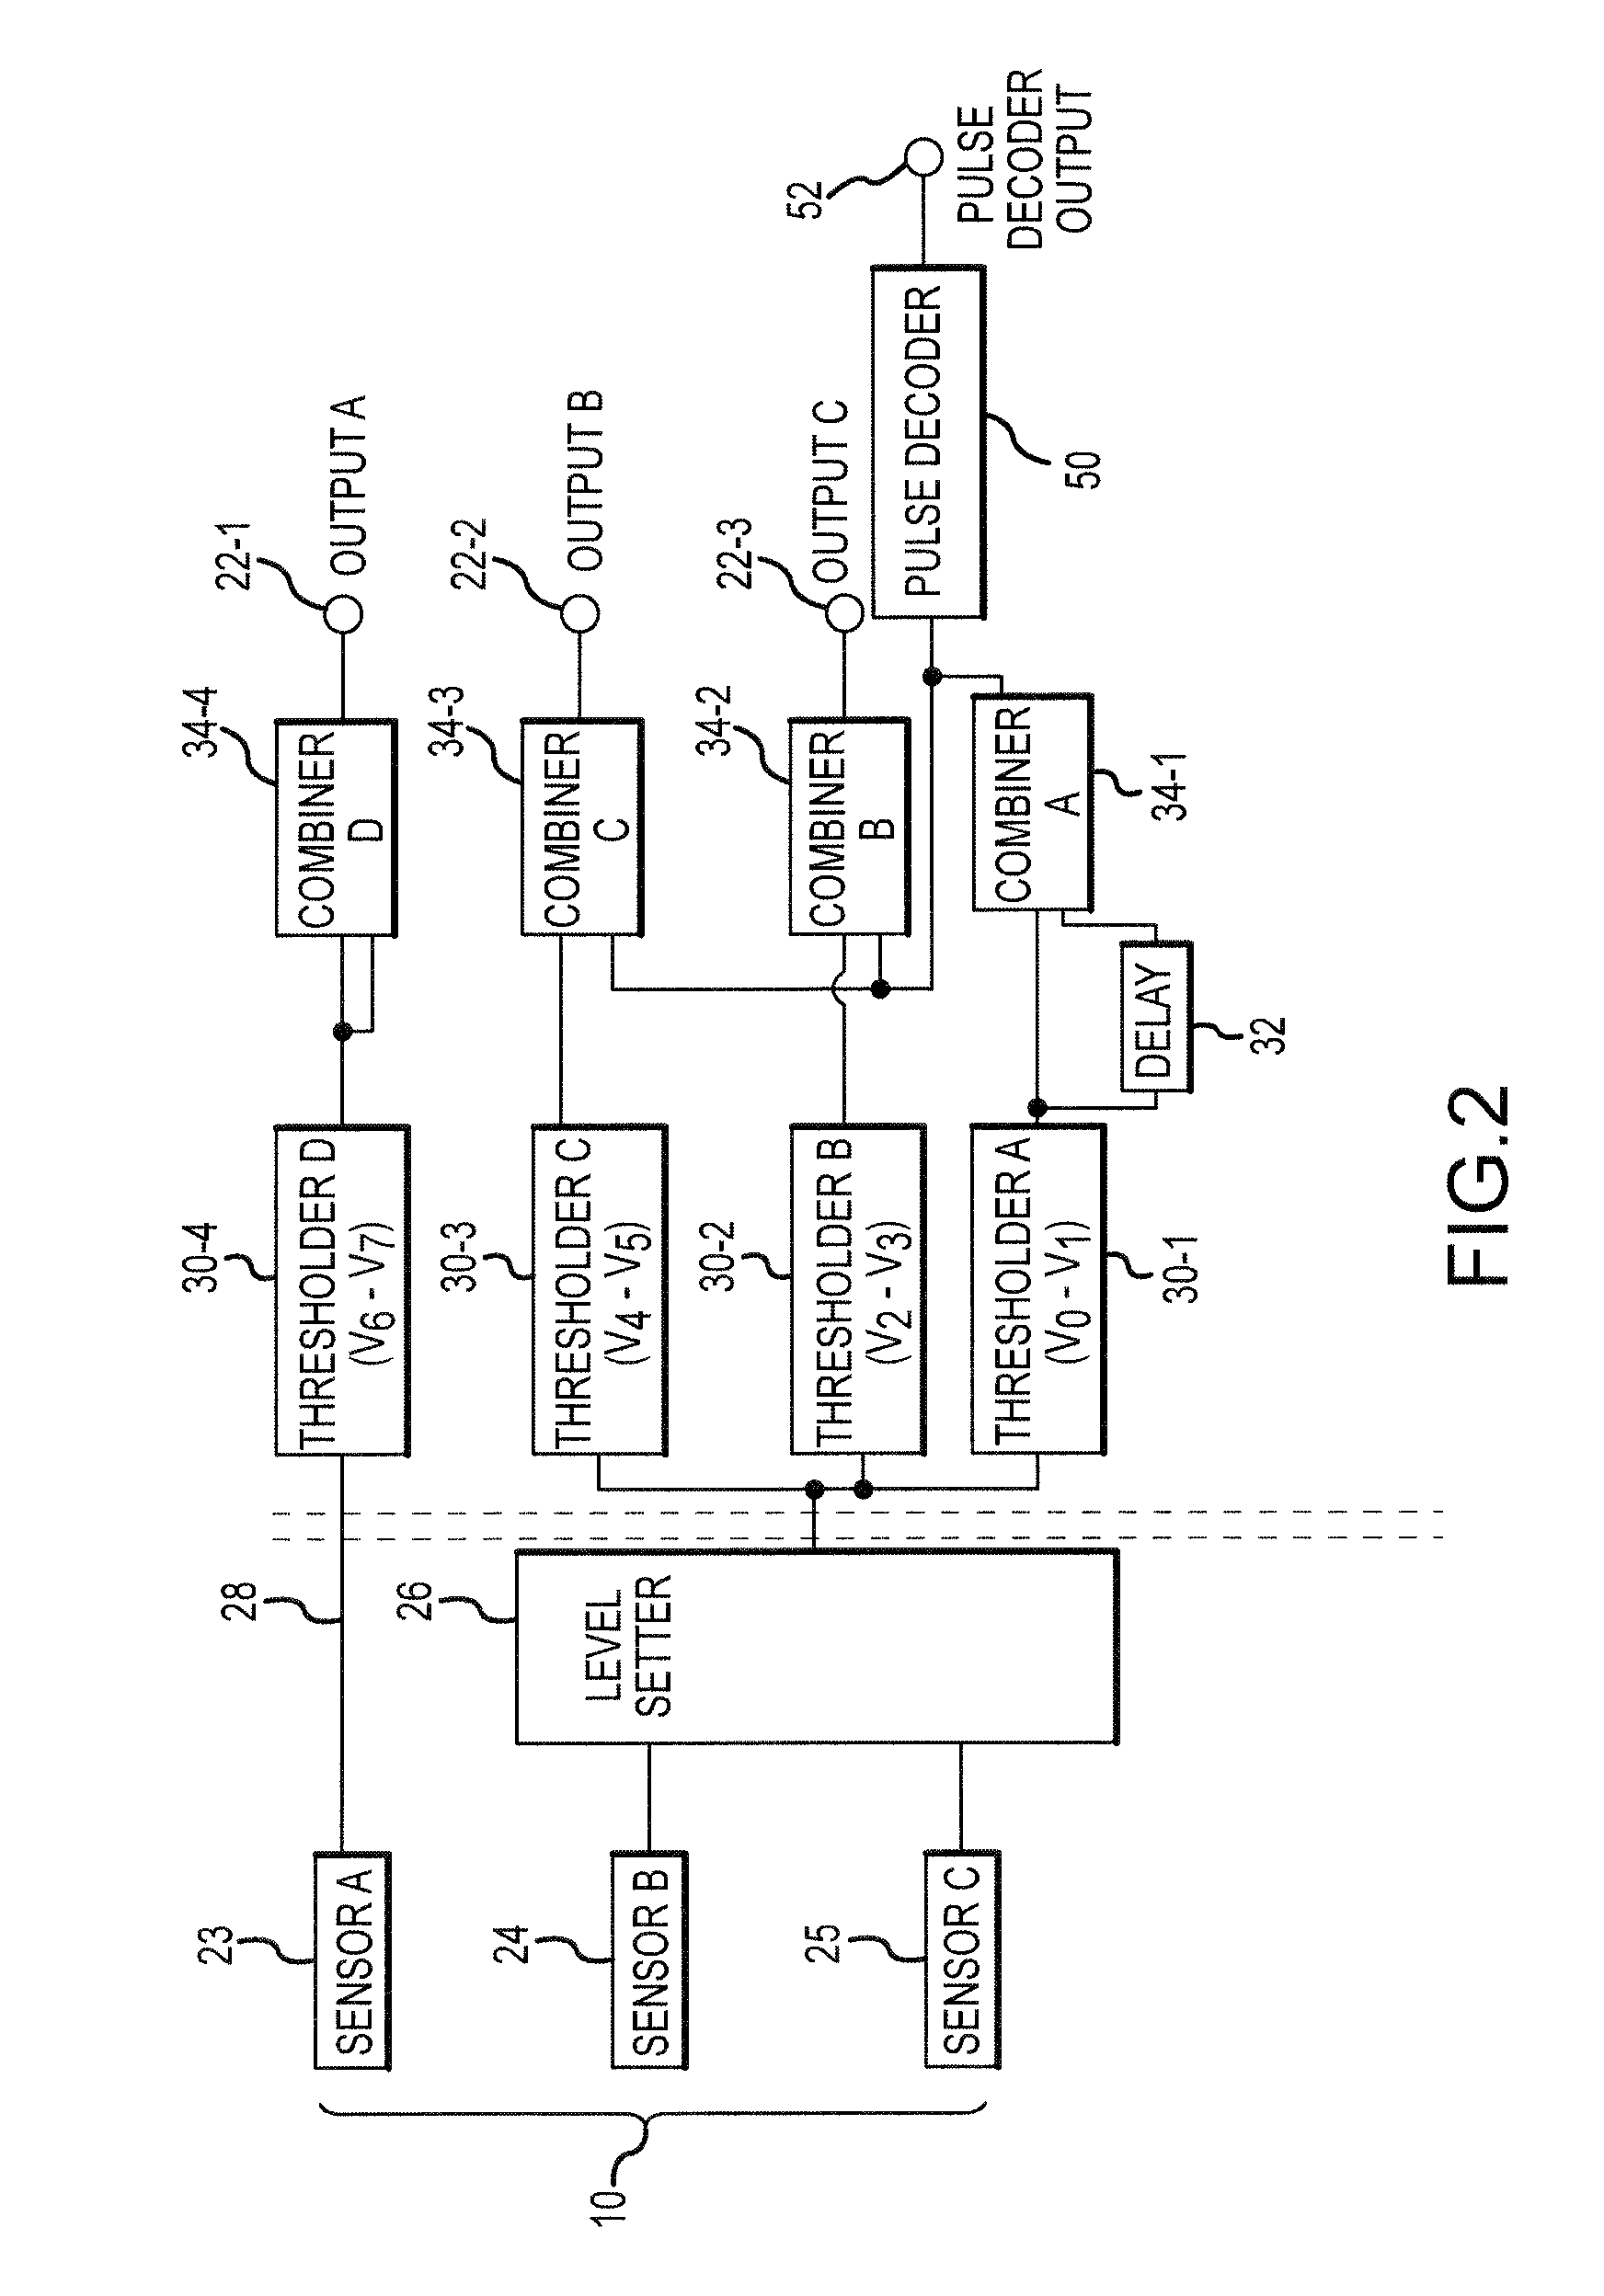 Sensor wire count reduction system